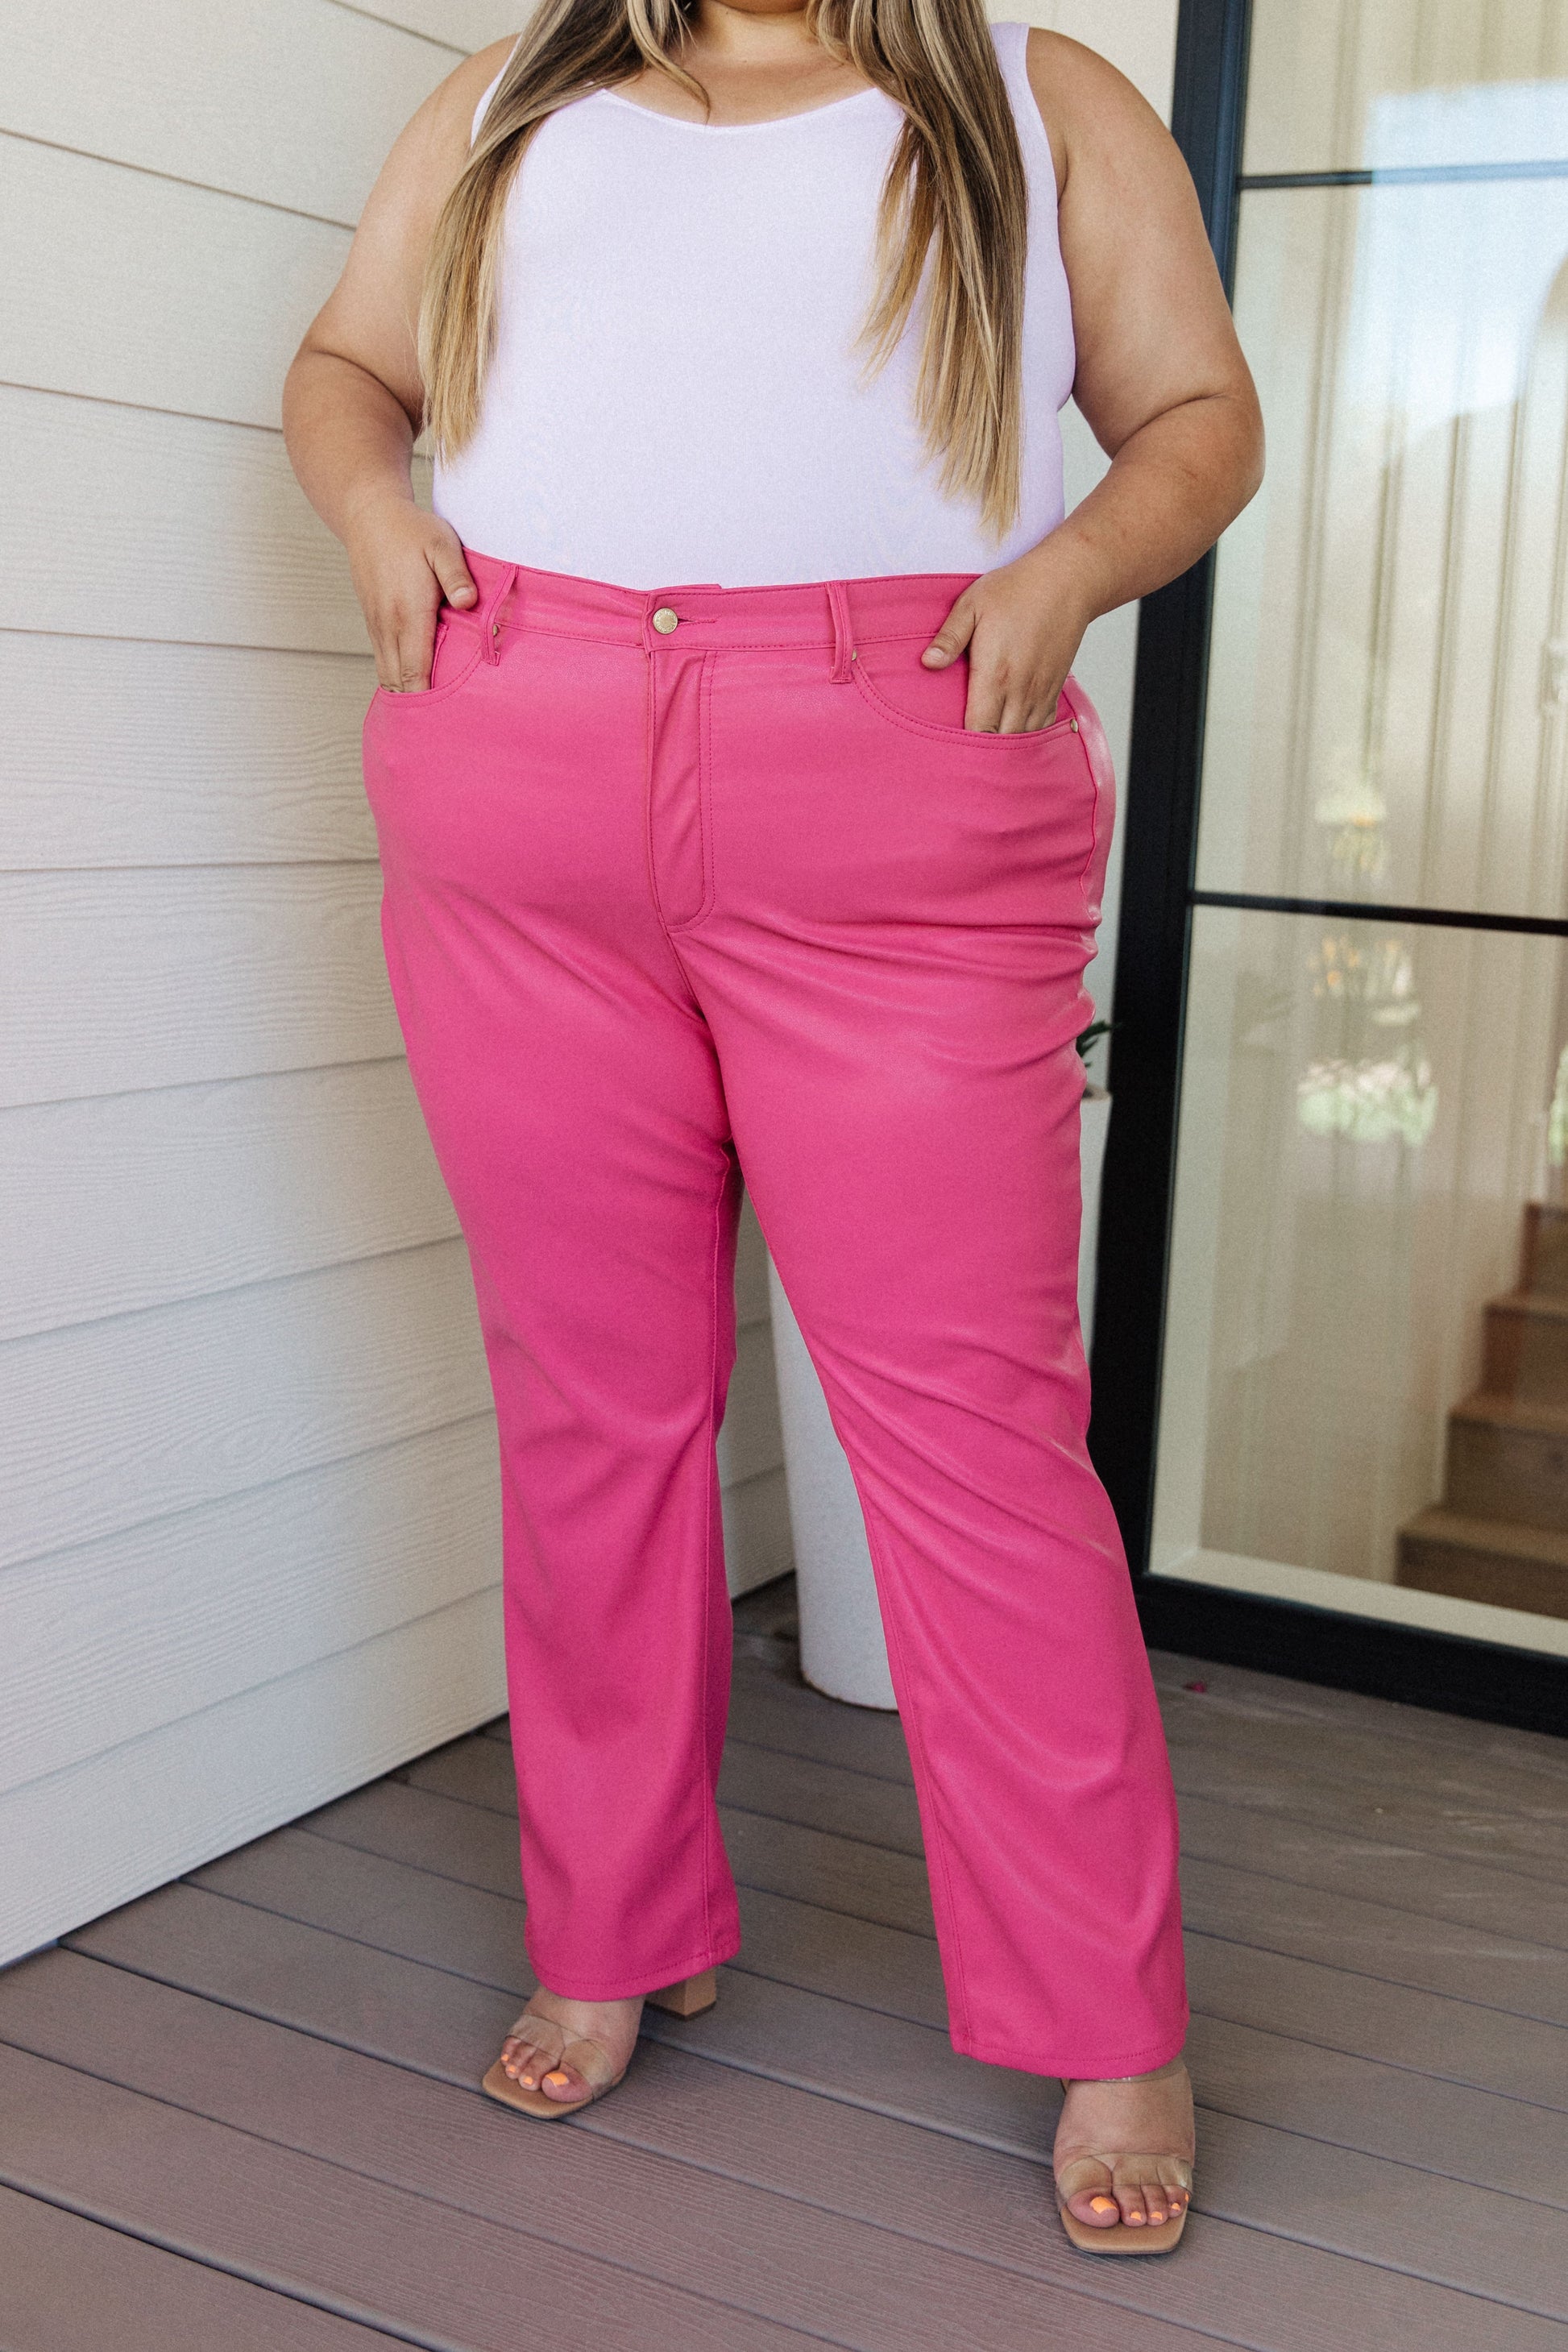 Tanya Control Top Faux Leather Pants in Hot Pink - AnnRose Boutique